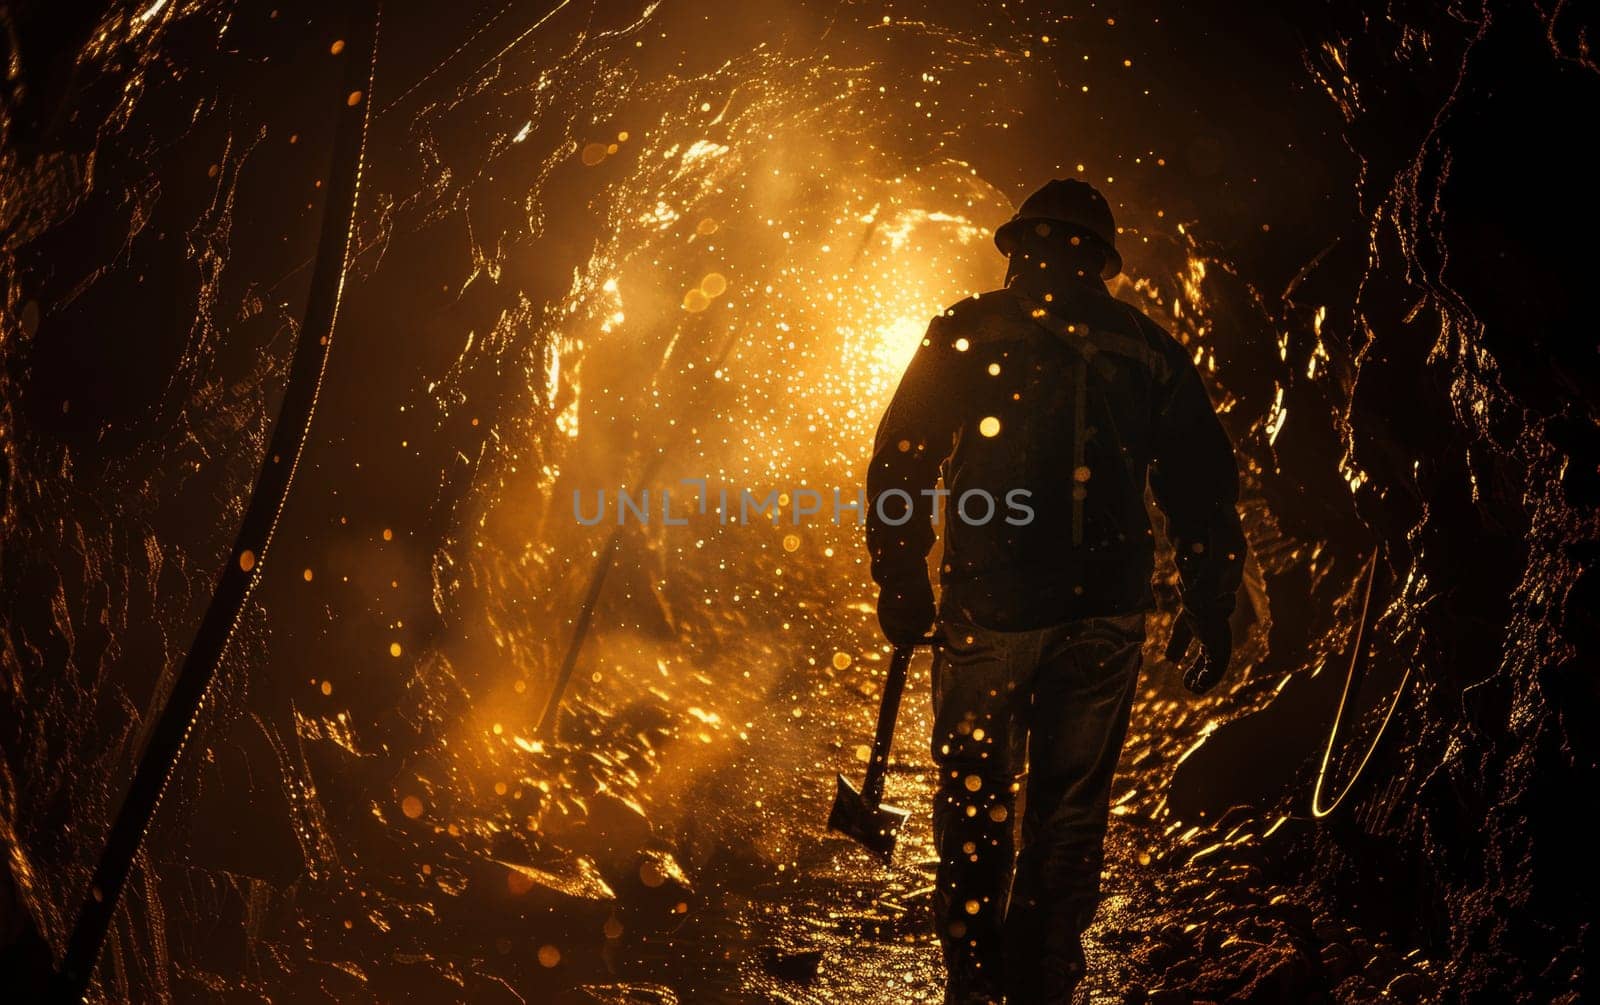 Miner walking in a tunnel, illuminated by a warm golden light, carrying a pickaxe. by sfinks